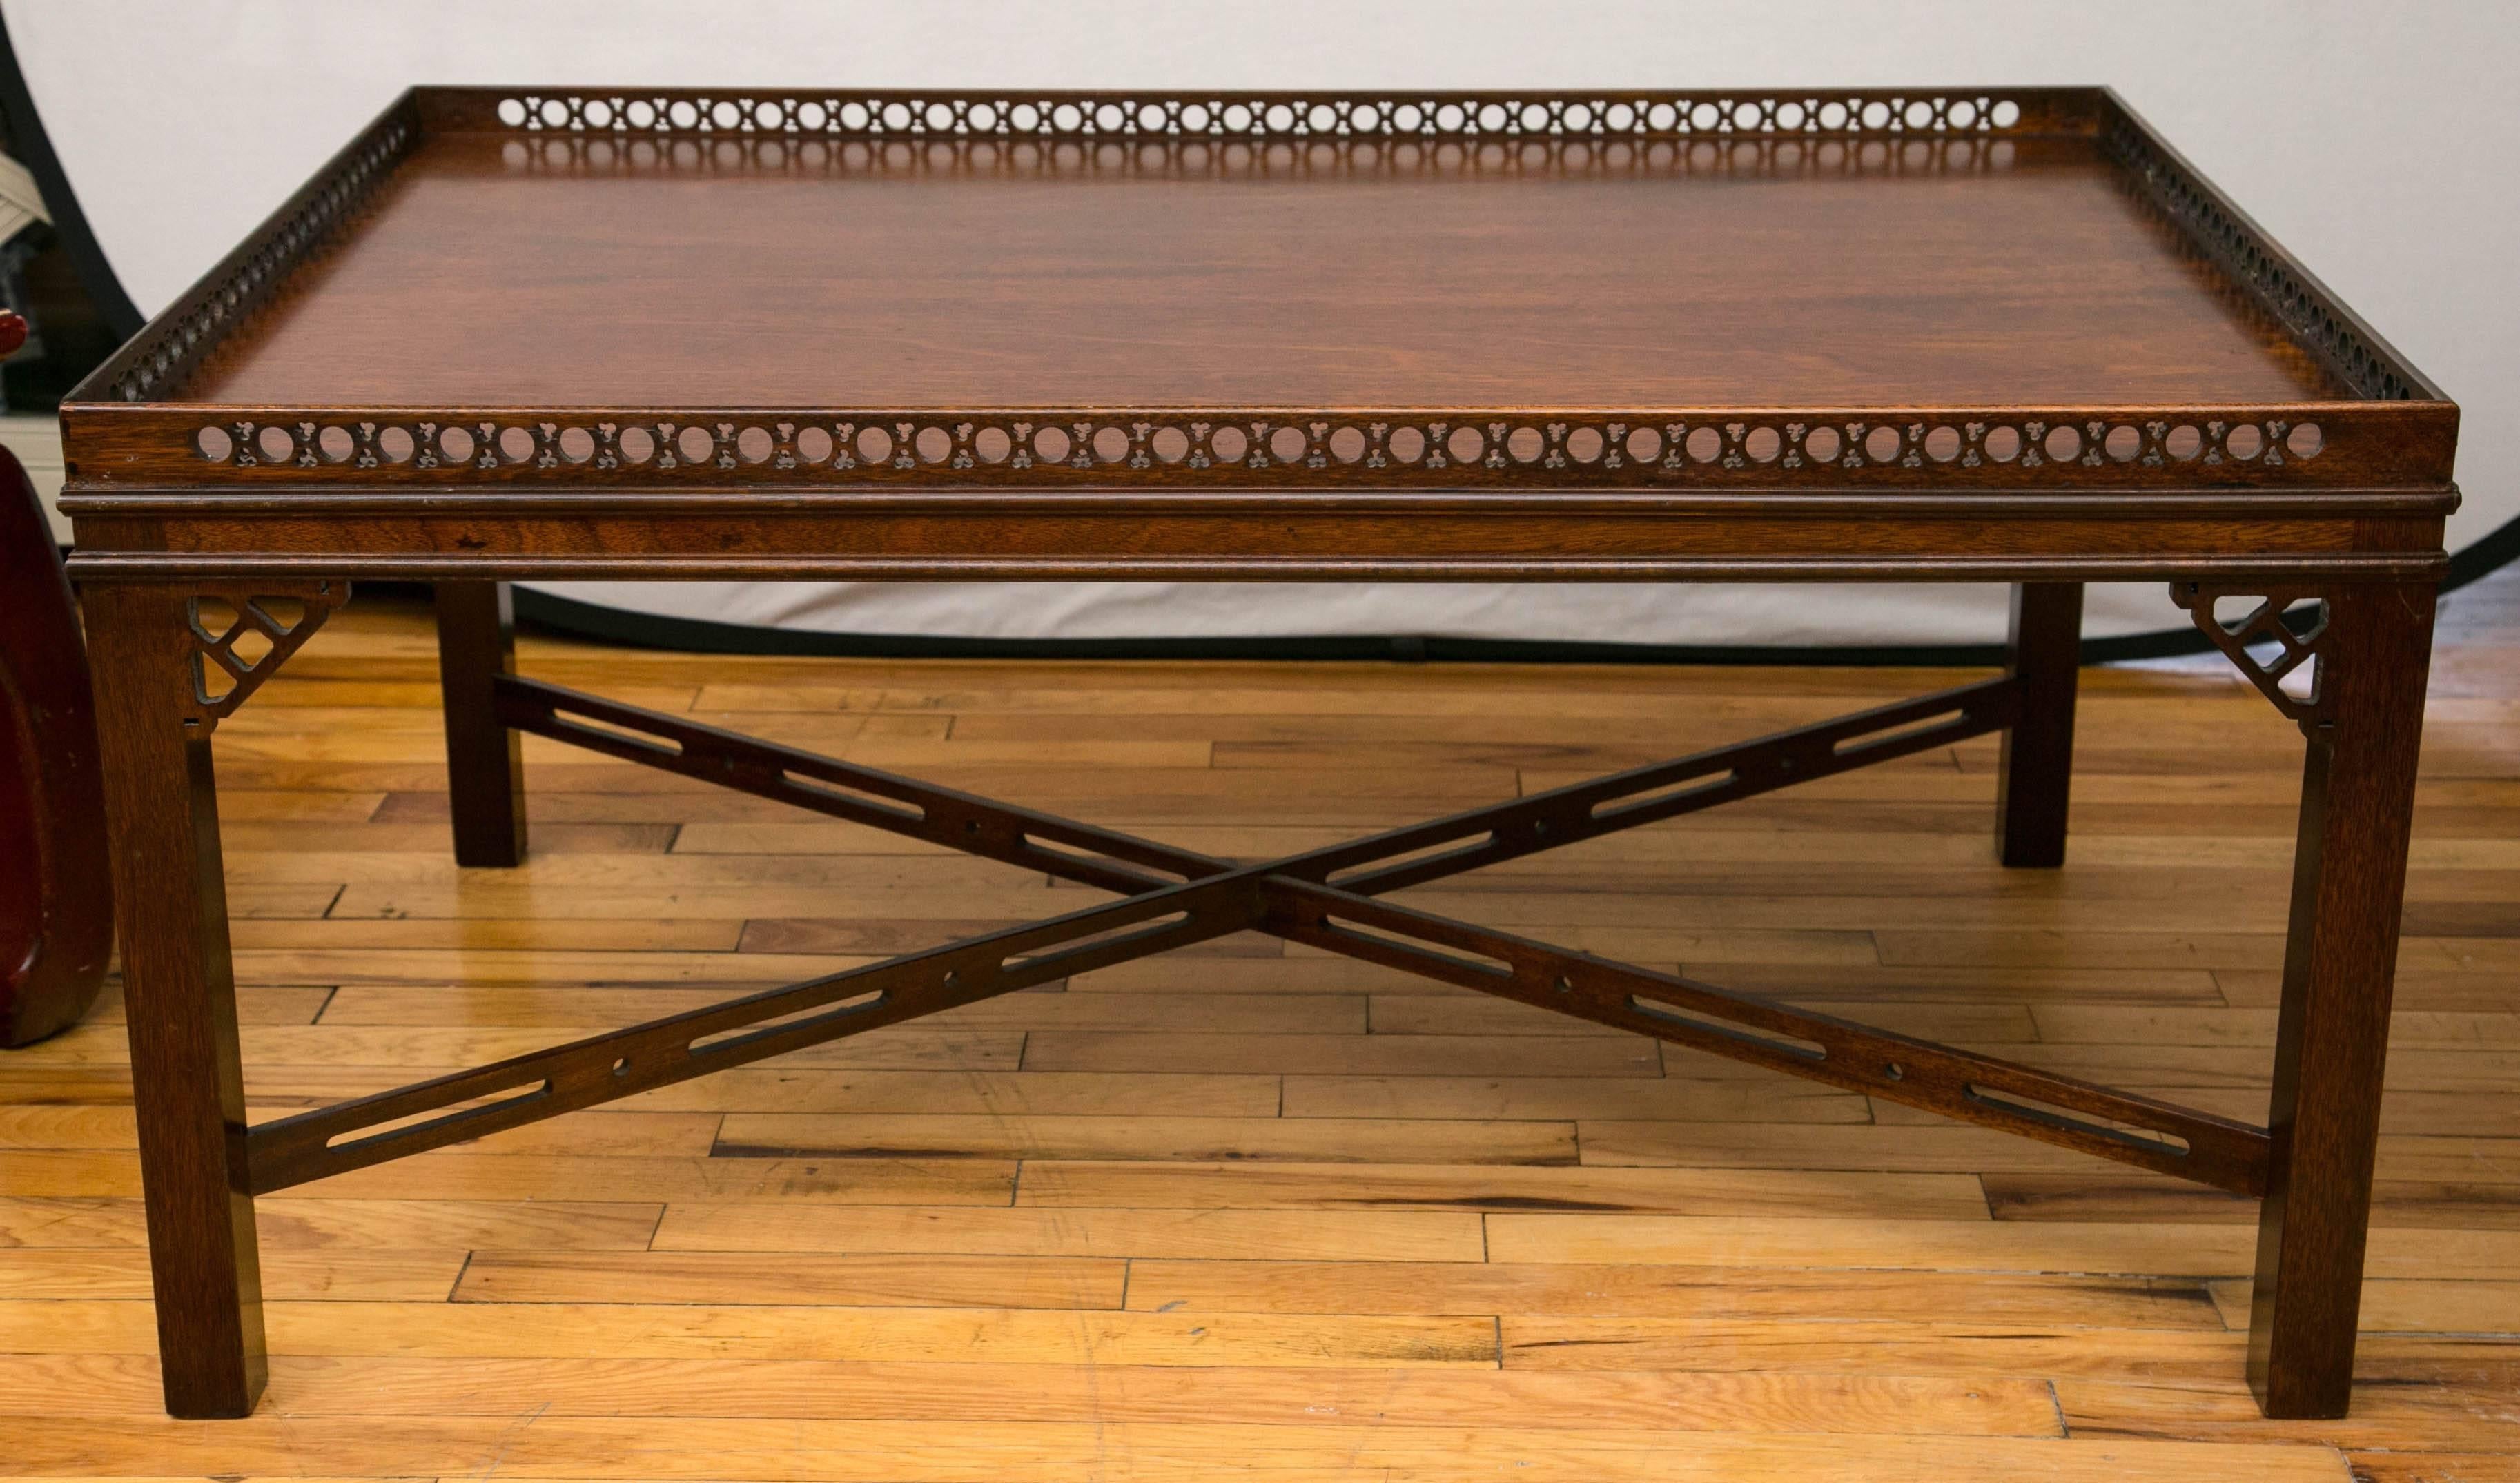 A large rectangular top low table with carved gallery rail supported by four square legs and braced by carved fretwork stretchers. Fretwork corner brackets on top leg joints.
   